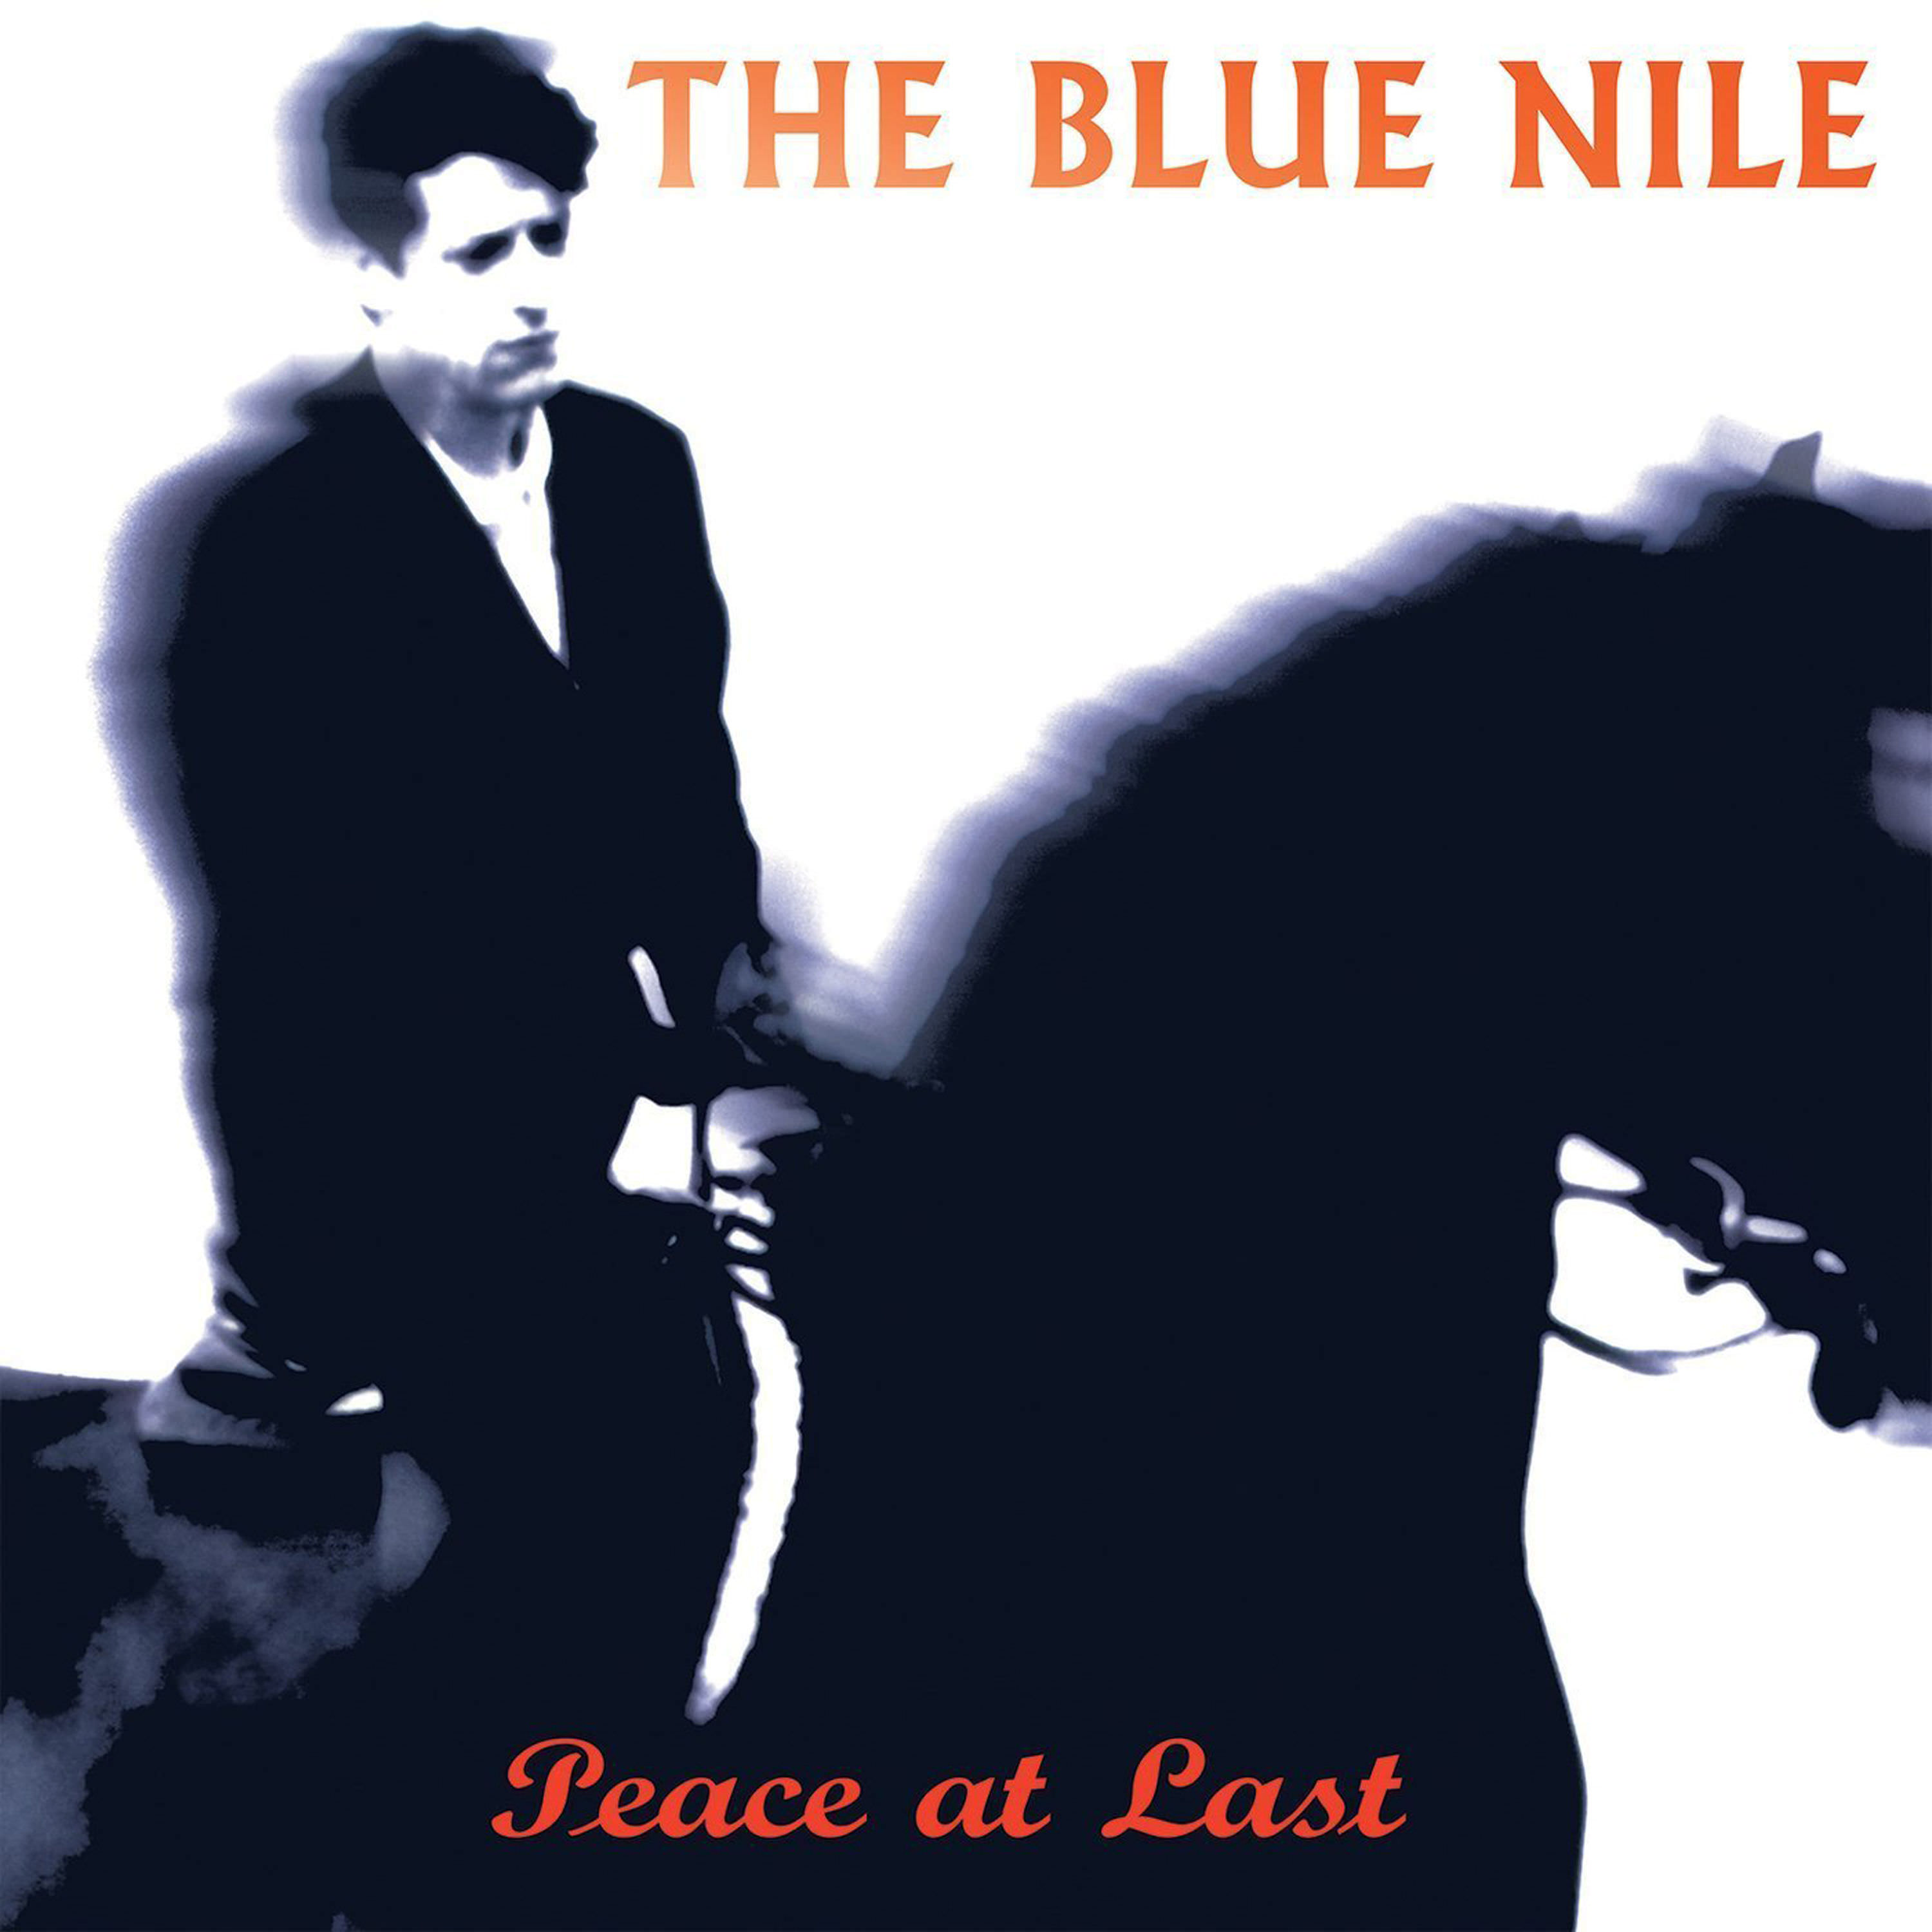 The Blue Nile – Peace At Last (Deluxe Edition) (1996/2014) [FLAC 24bit/44,1kHz]